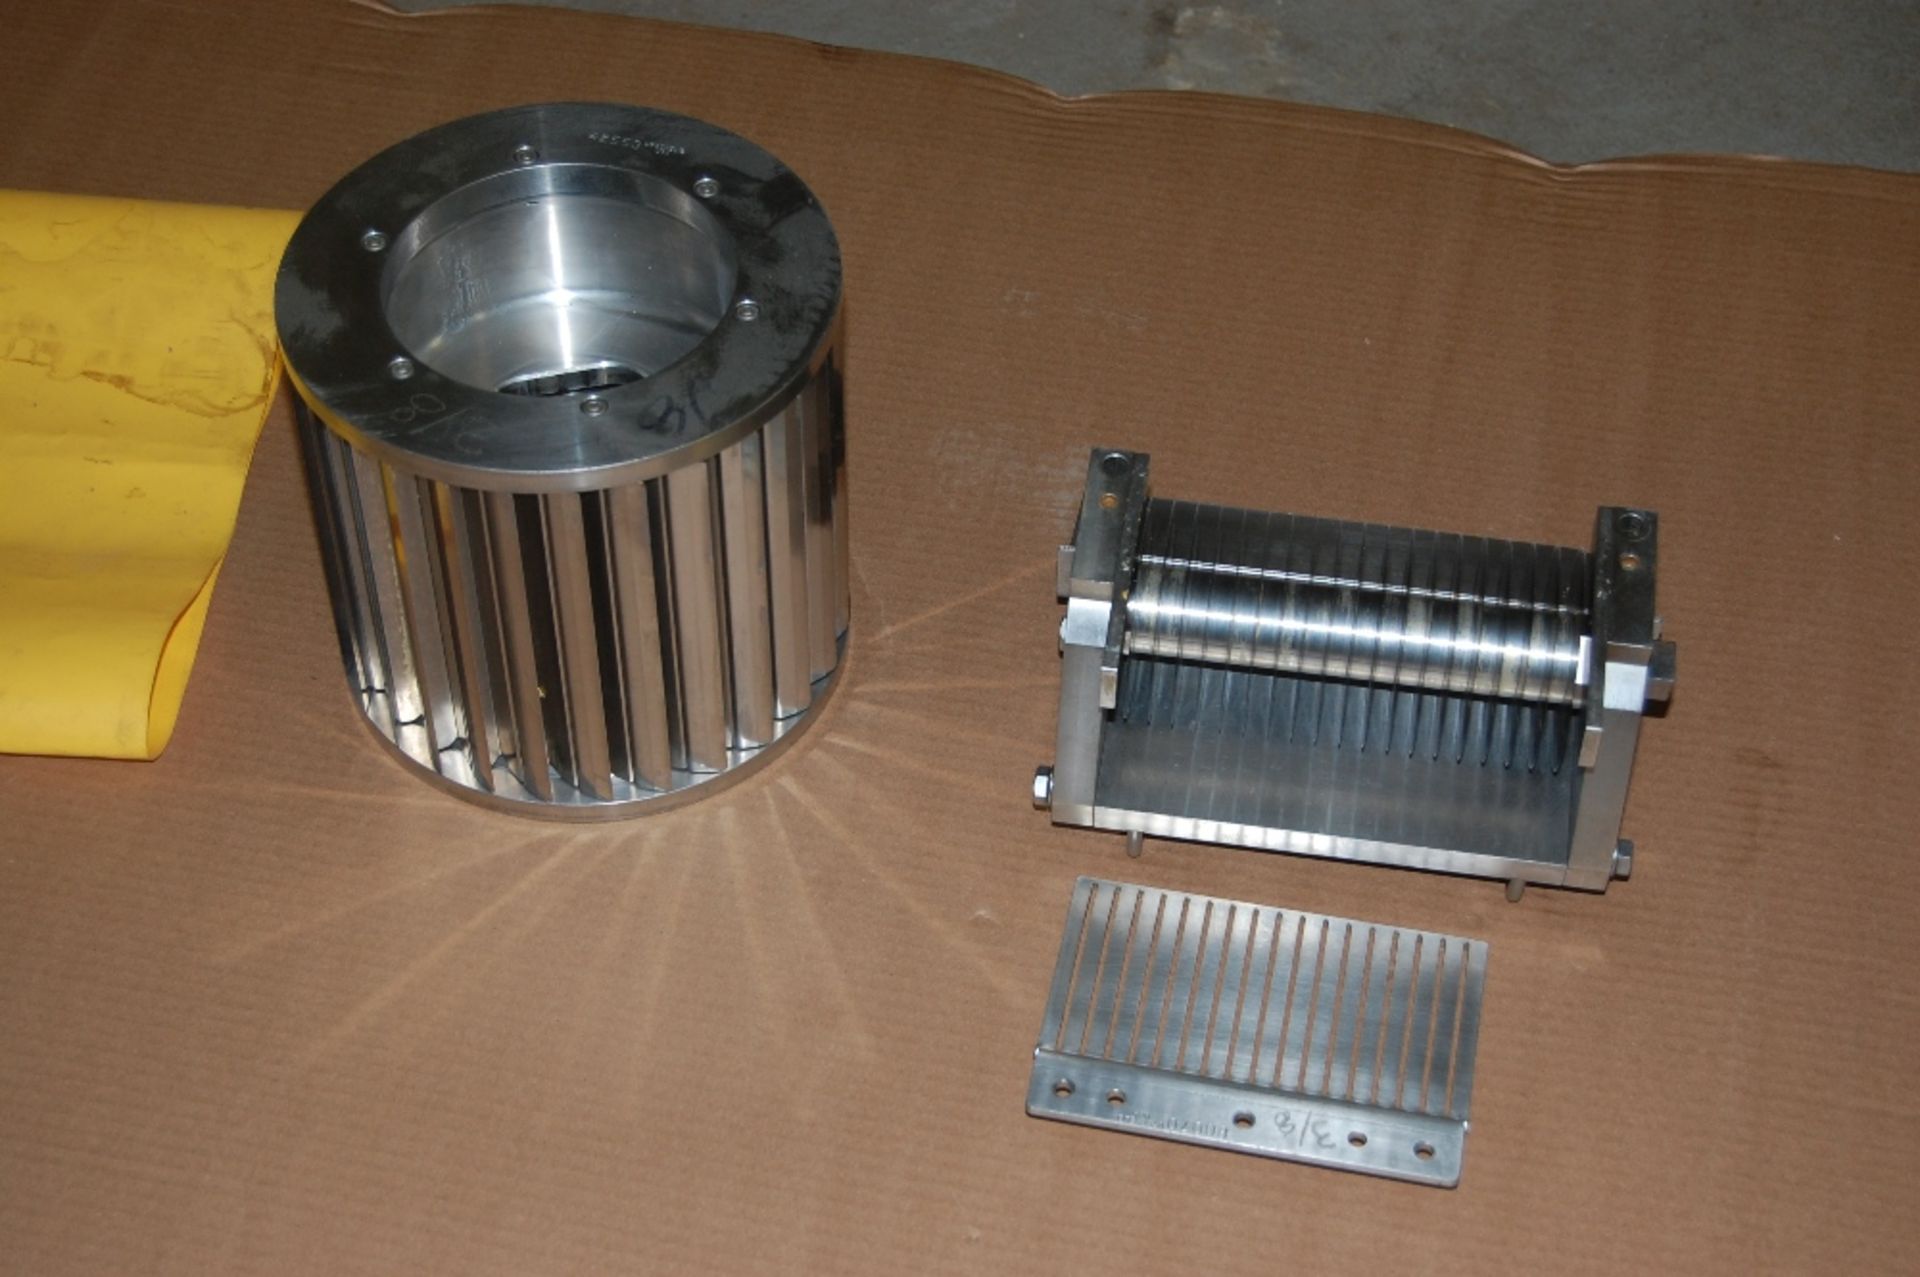 Urschel sprint 3/8 inch crossknife spindle assembly and circular spindle support assembly stripper - Image 6 of 7